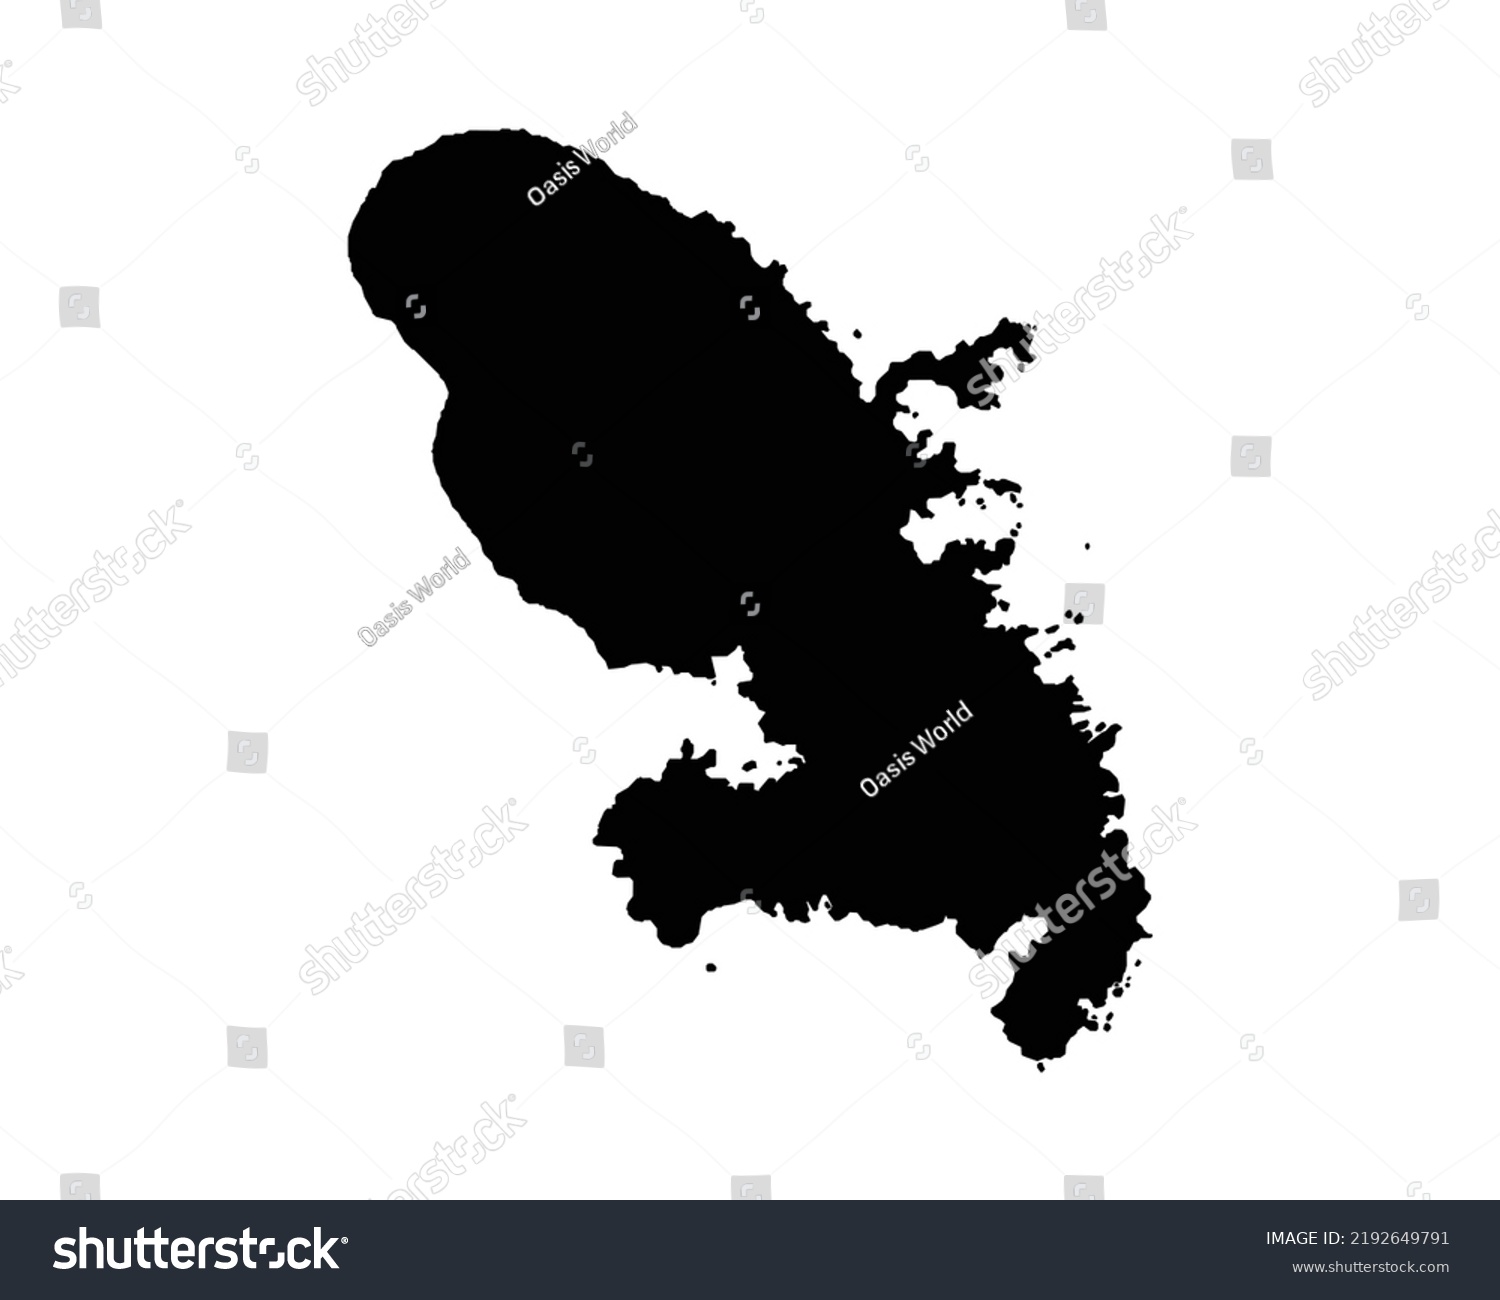 SVG of Martinique Map. Martinique Island Map. Black and White French Overseas Department Territory Border Boundary Line Outline Geography Shape Vector Illustration EPS Clipart svg